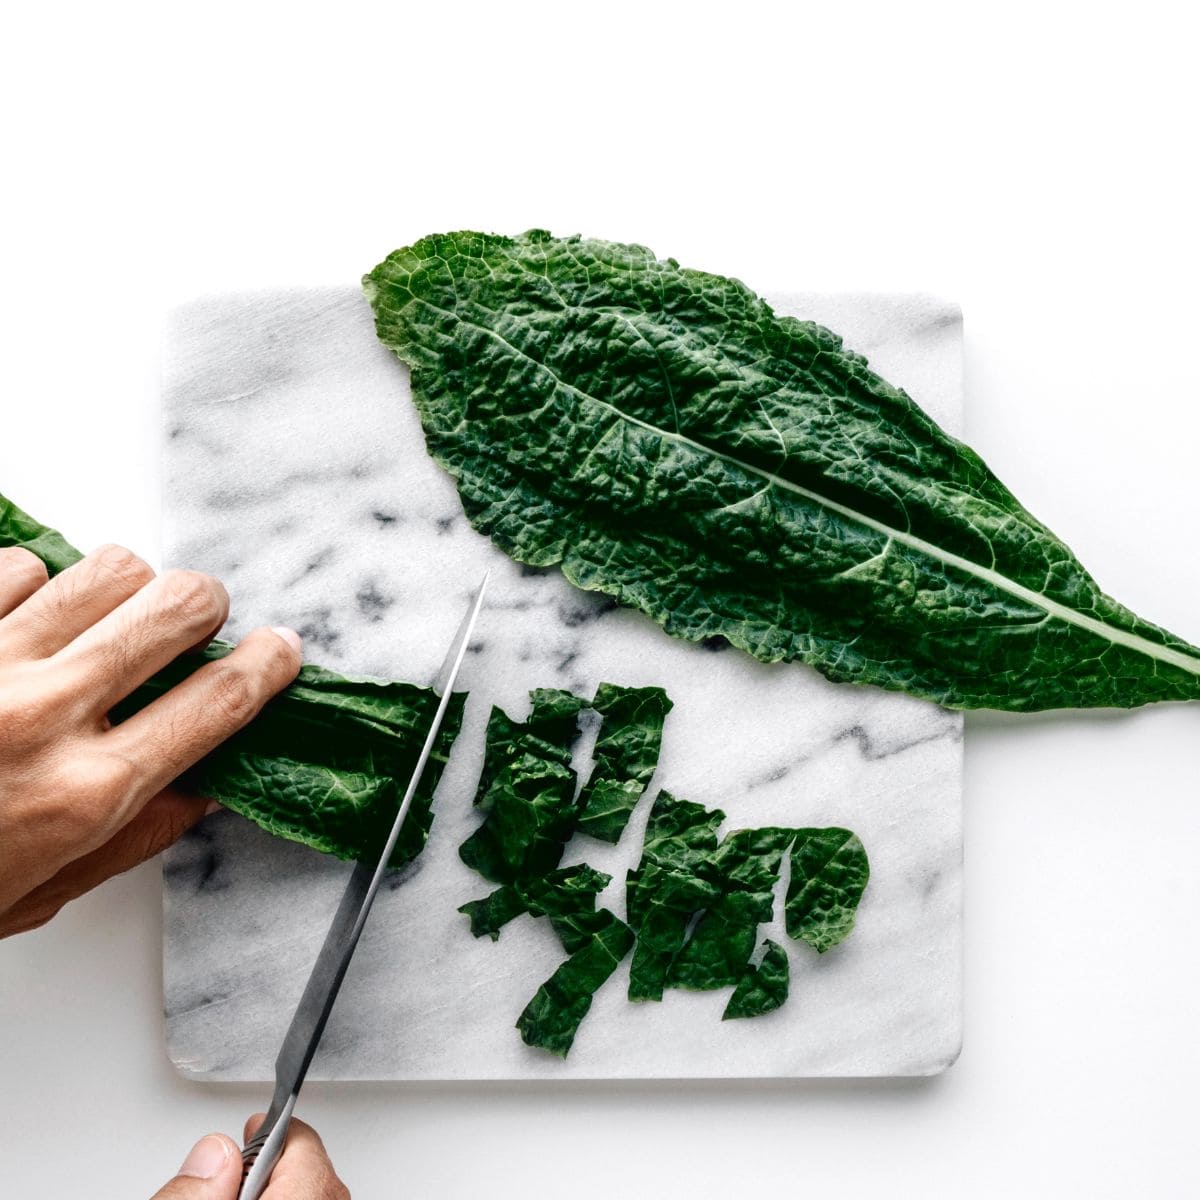 hand cutting kale leaves on a marble surface.